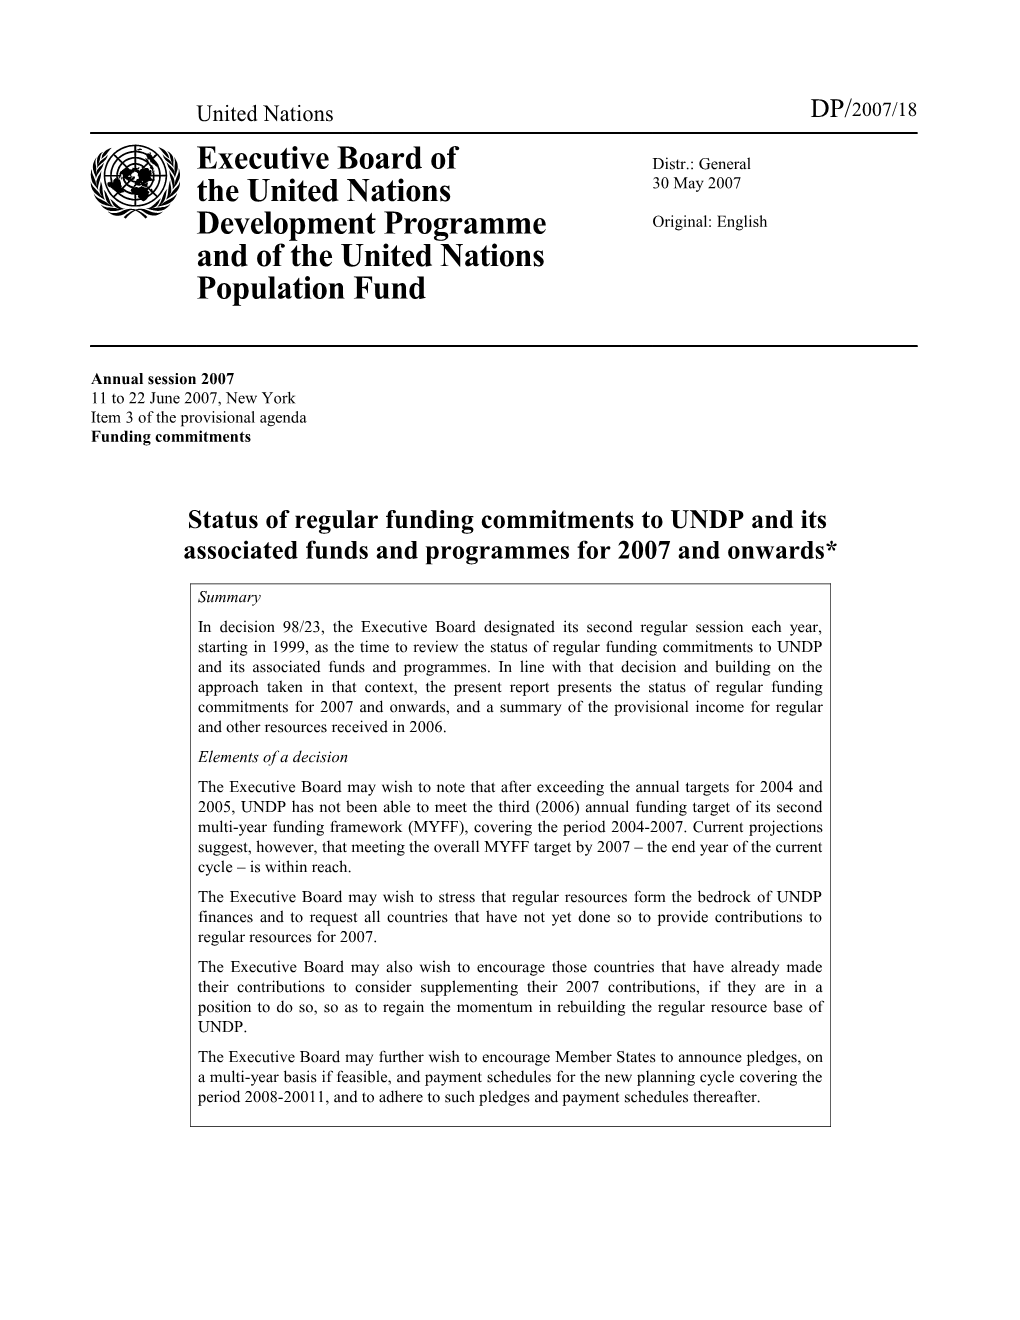 Status of Regular Funding Commitments to UNDP and Its